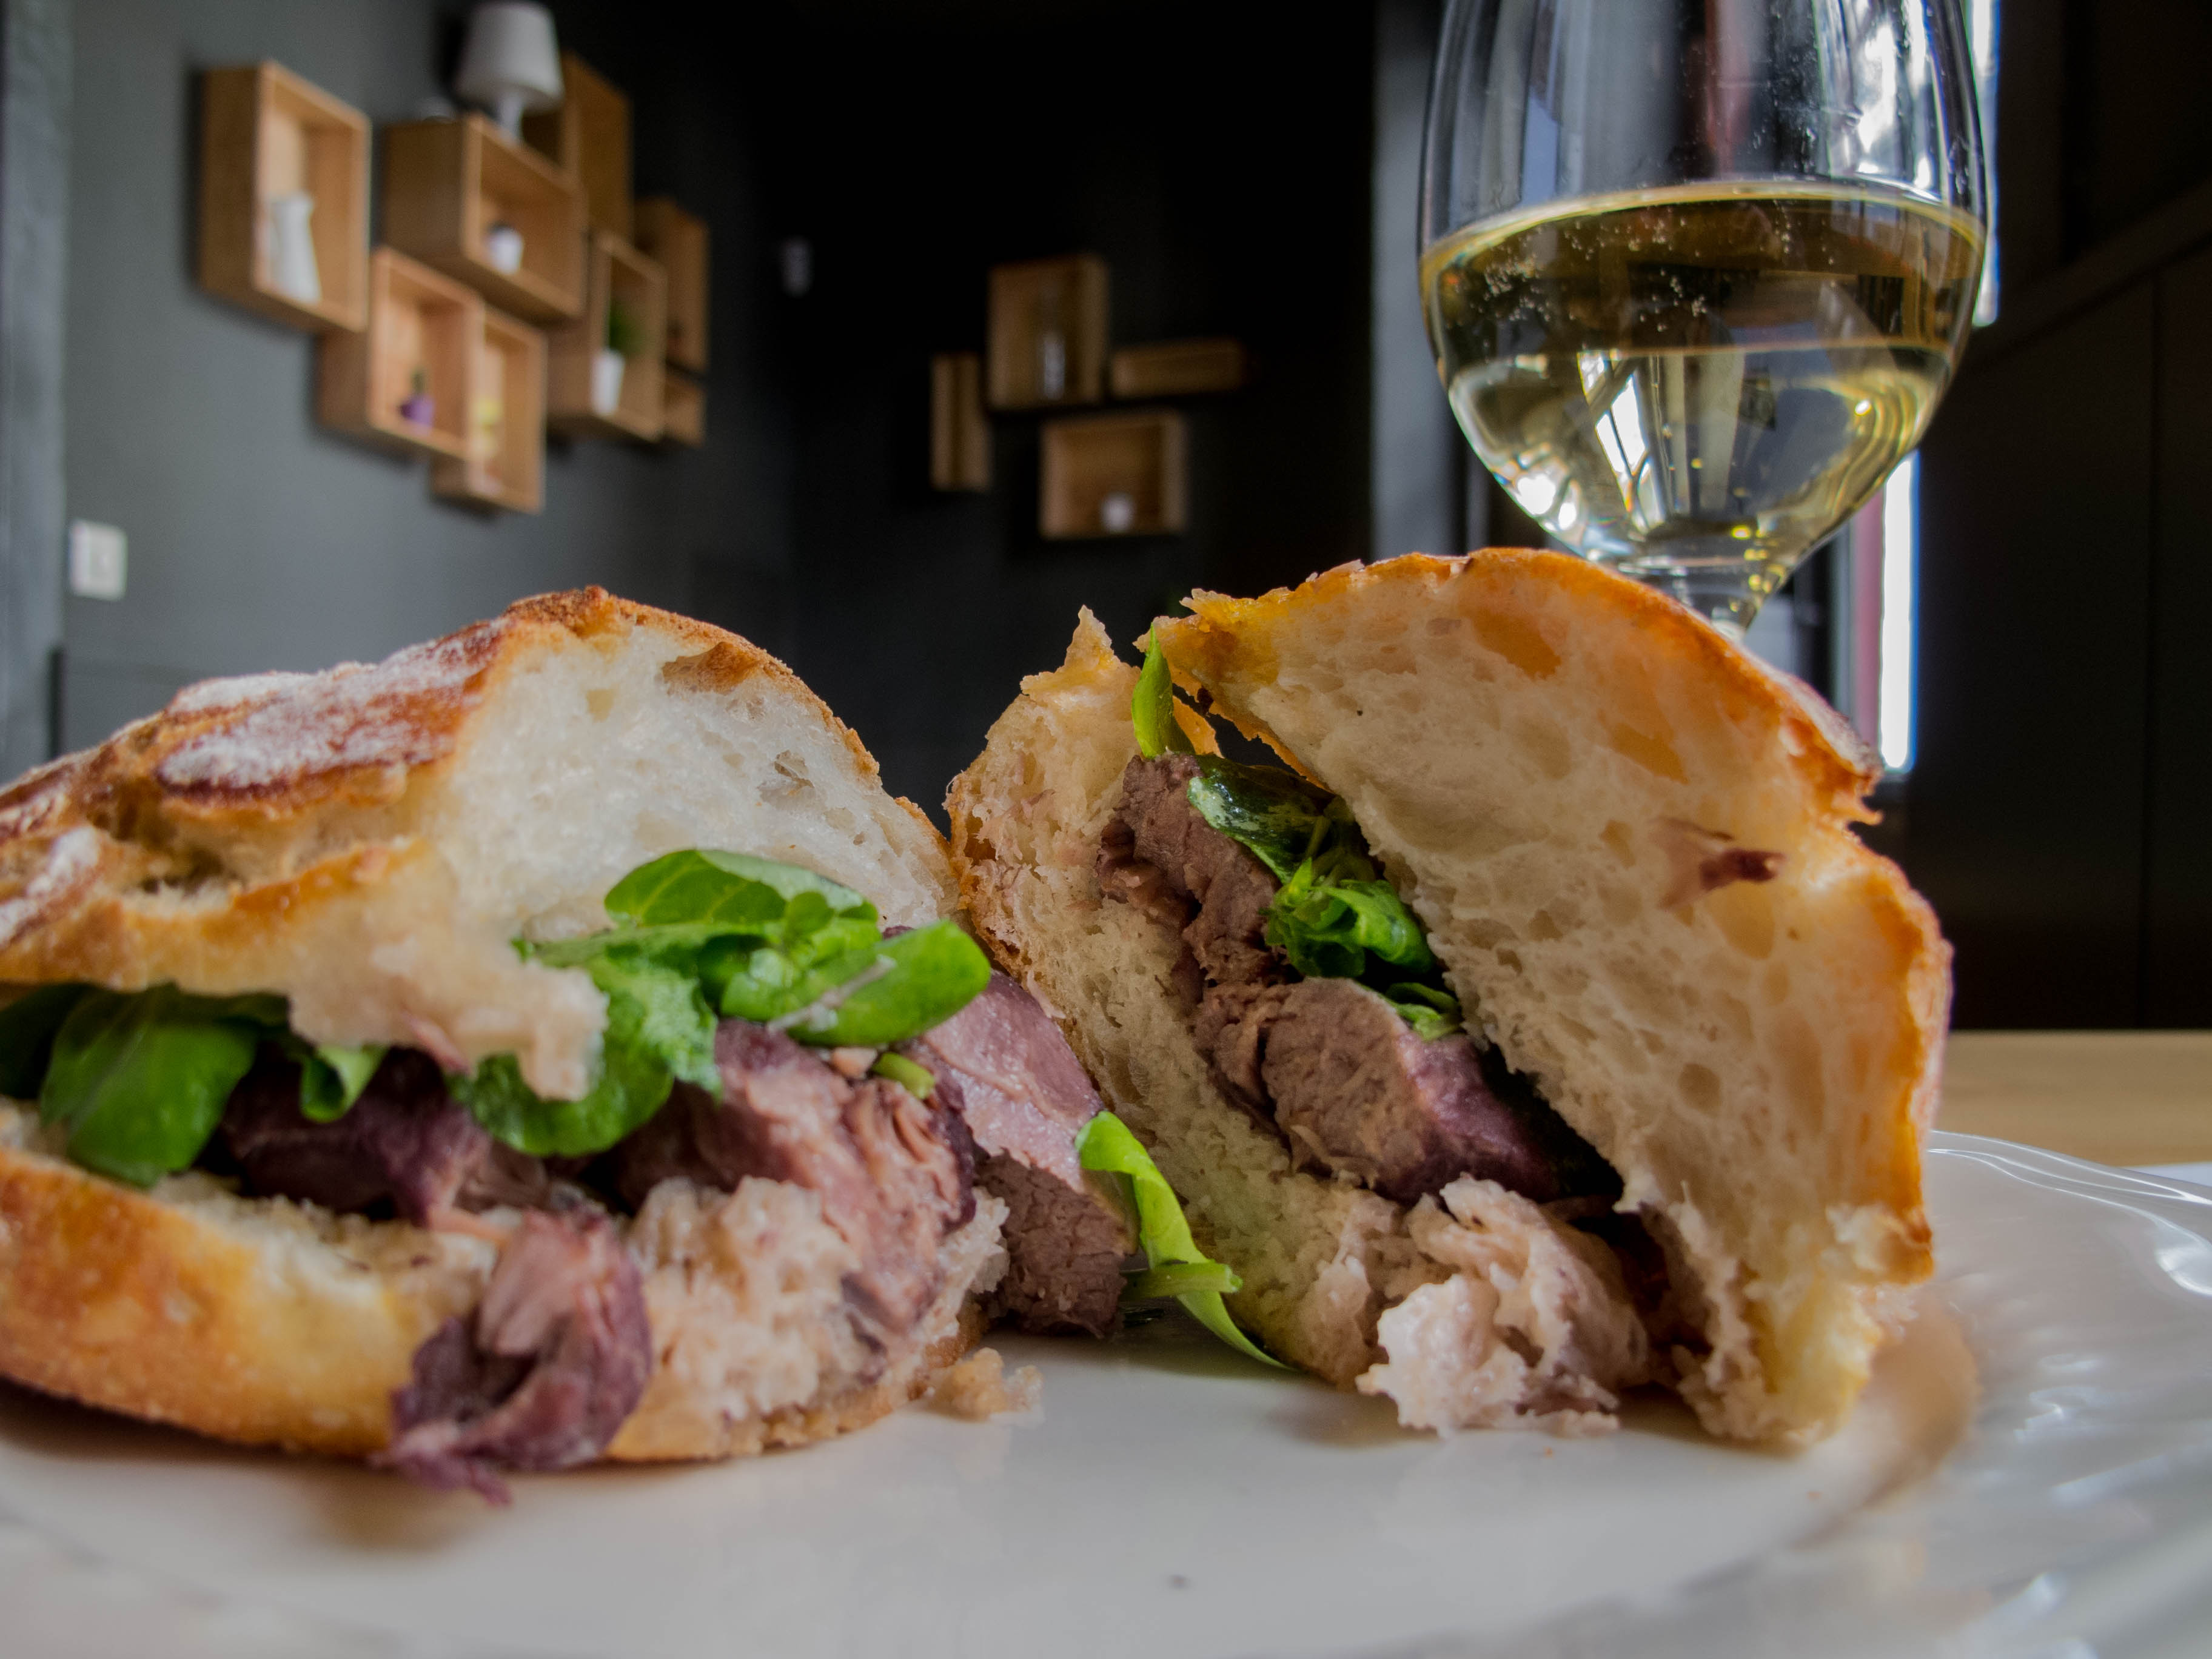 Iberian Sandwiches with the matching Vinho Verde.